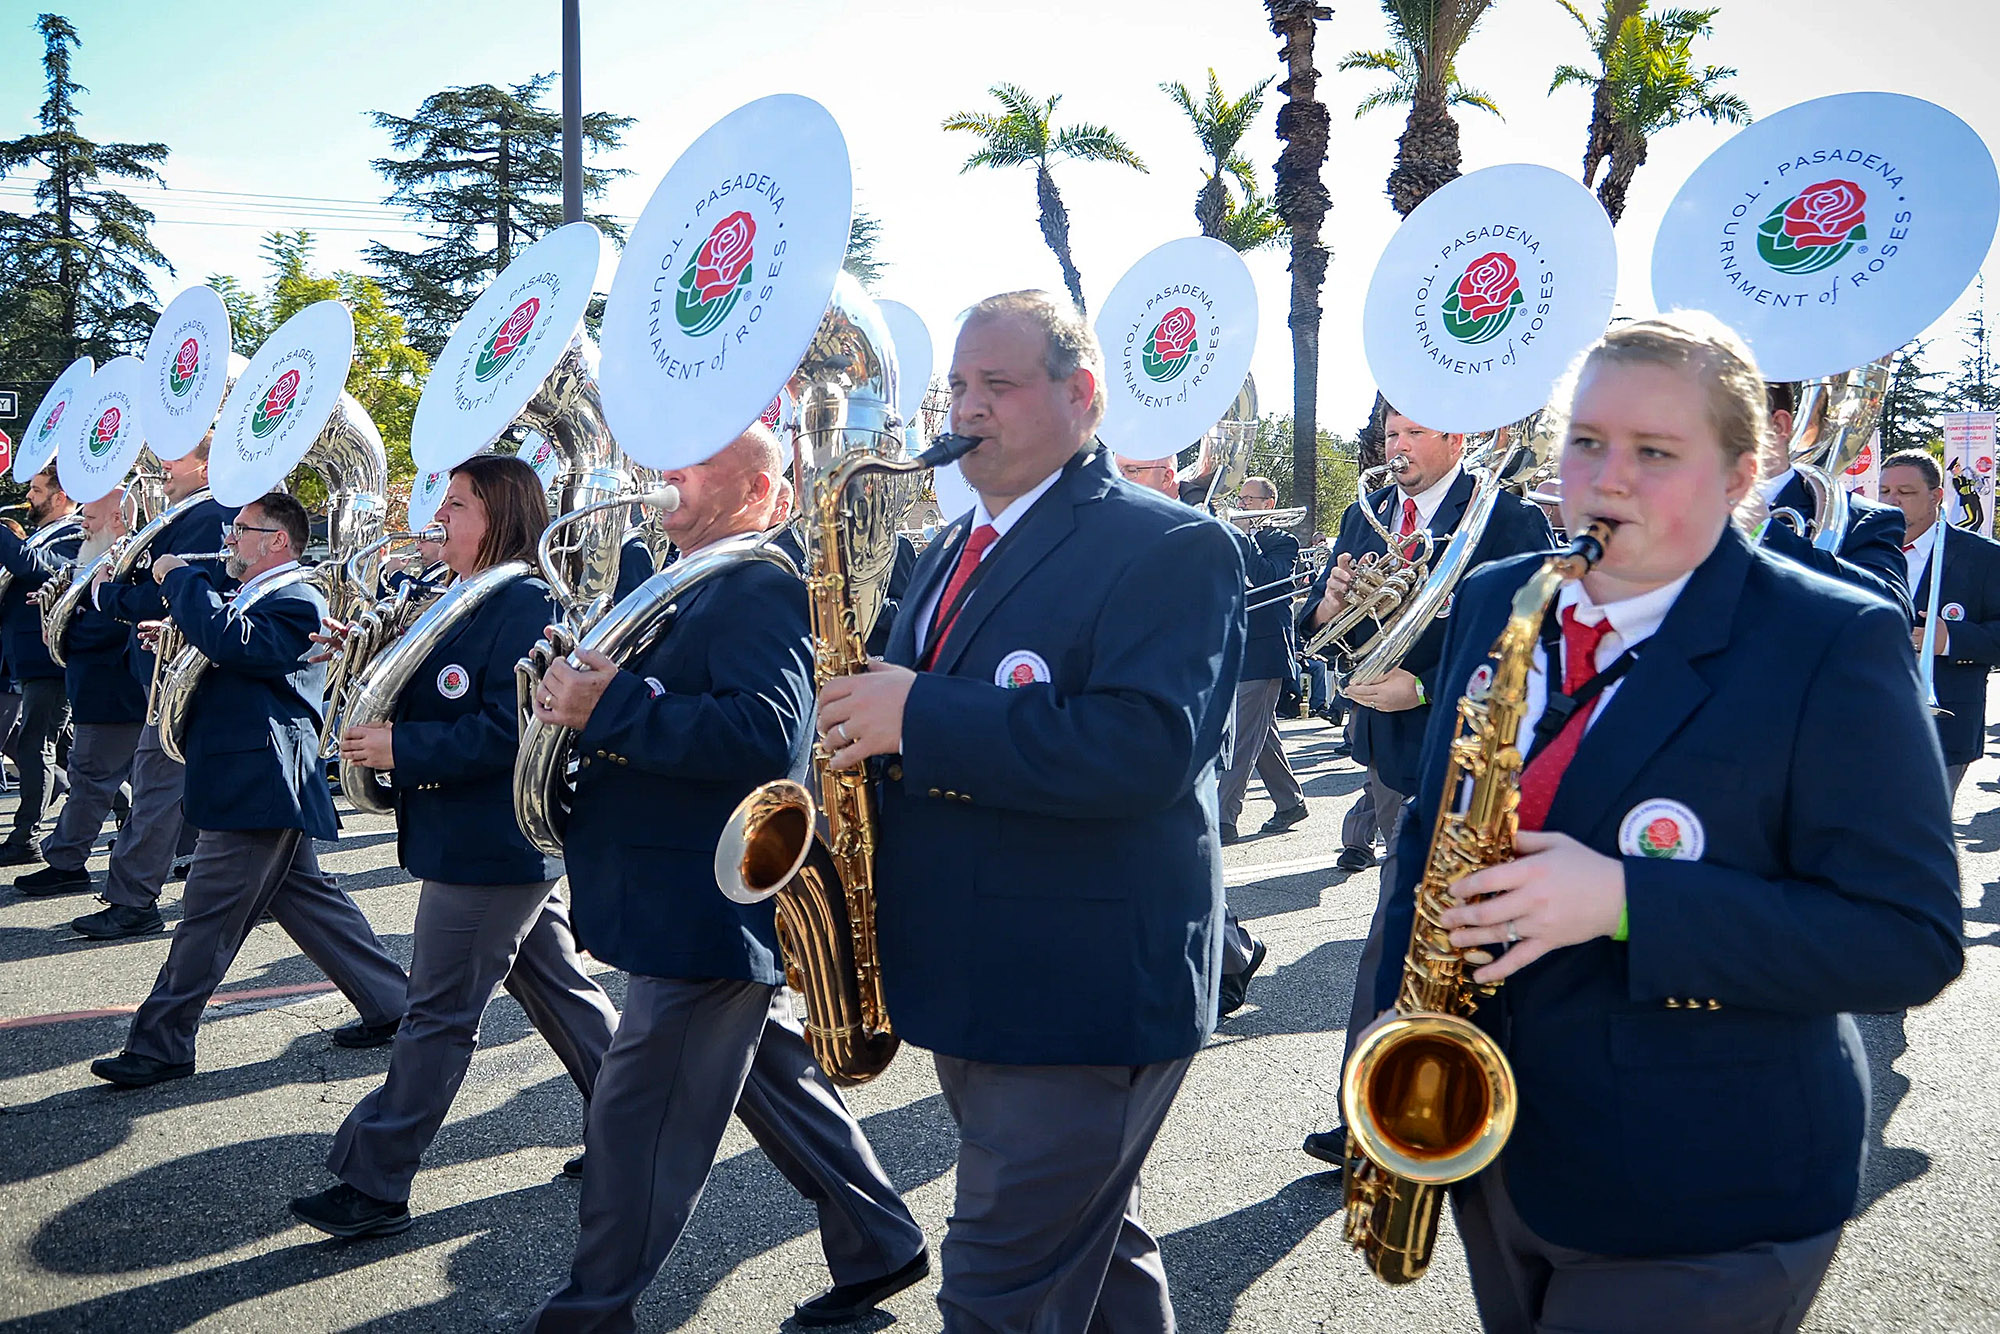 Brock Persson and other members of The Band Directors Marching Band perform during the Rose Parade in 2022. (Eric Mills Photography)